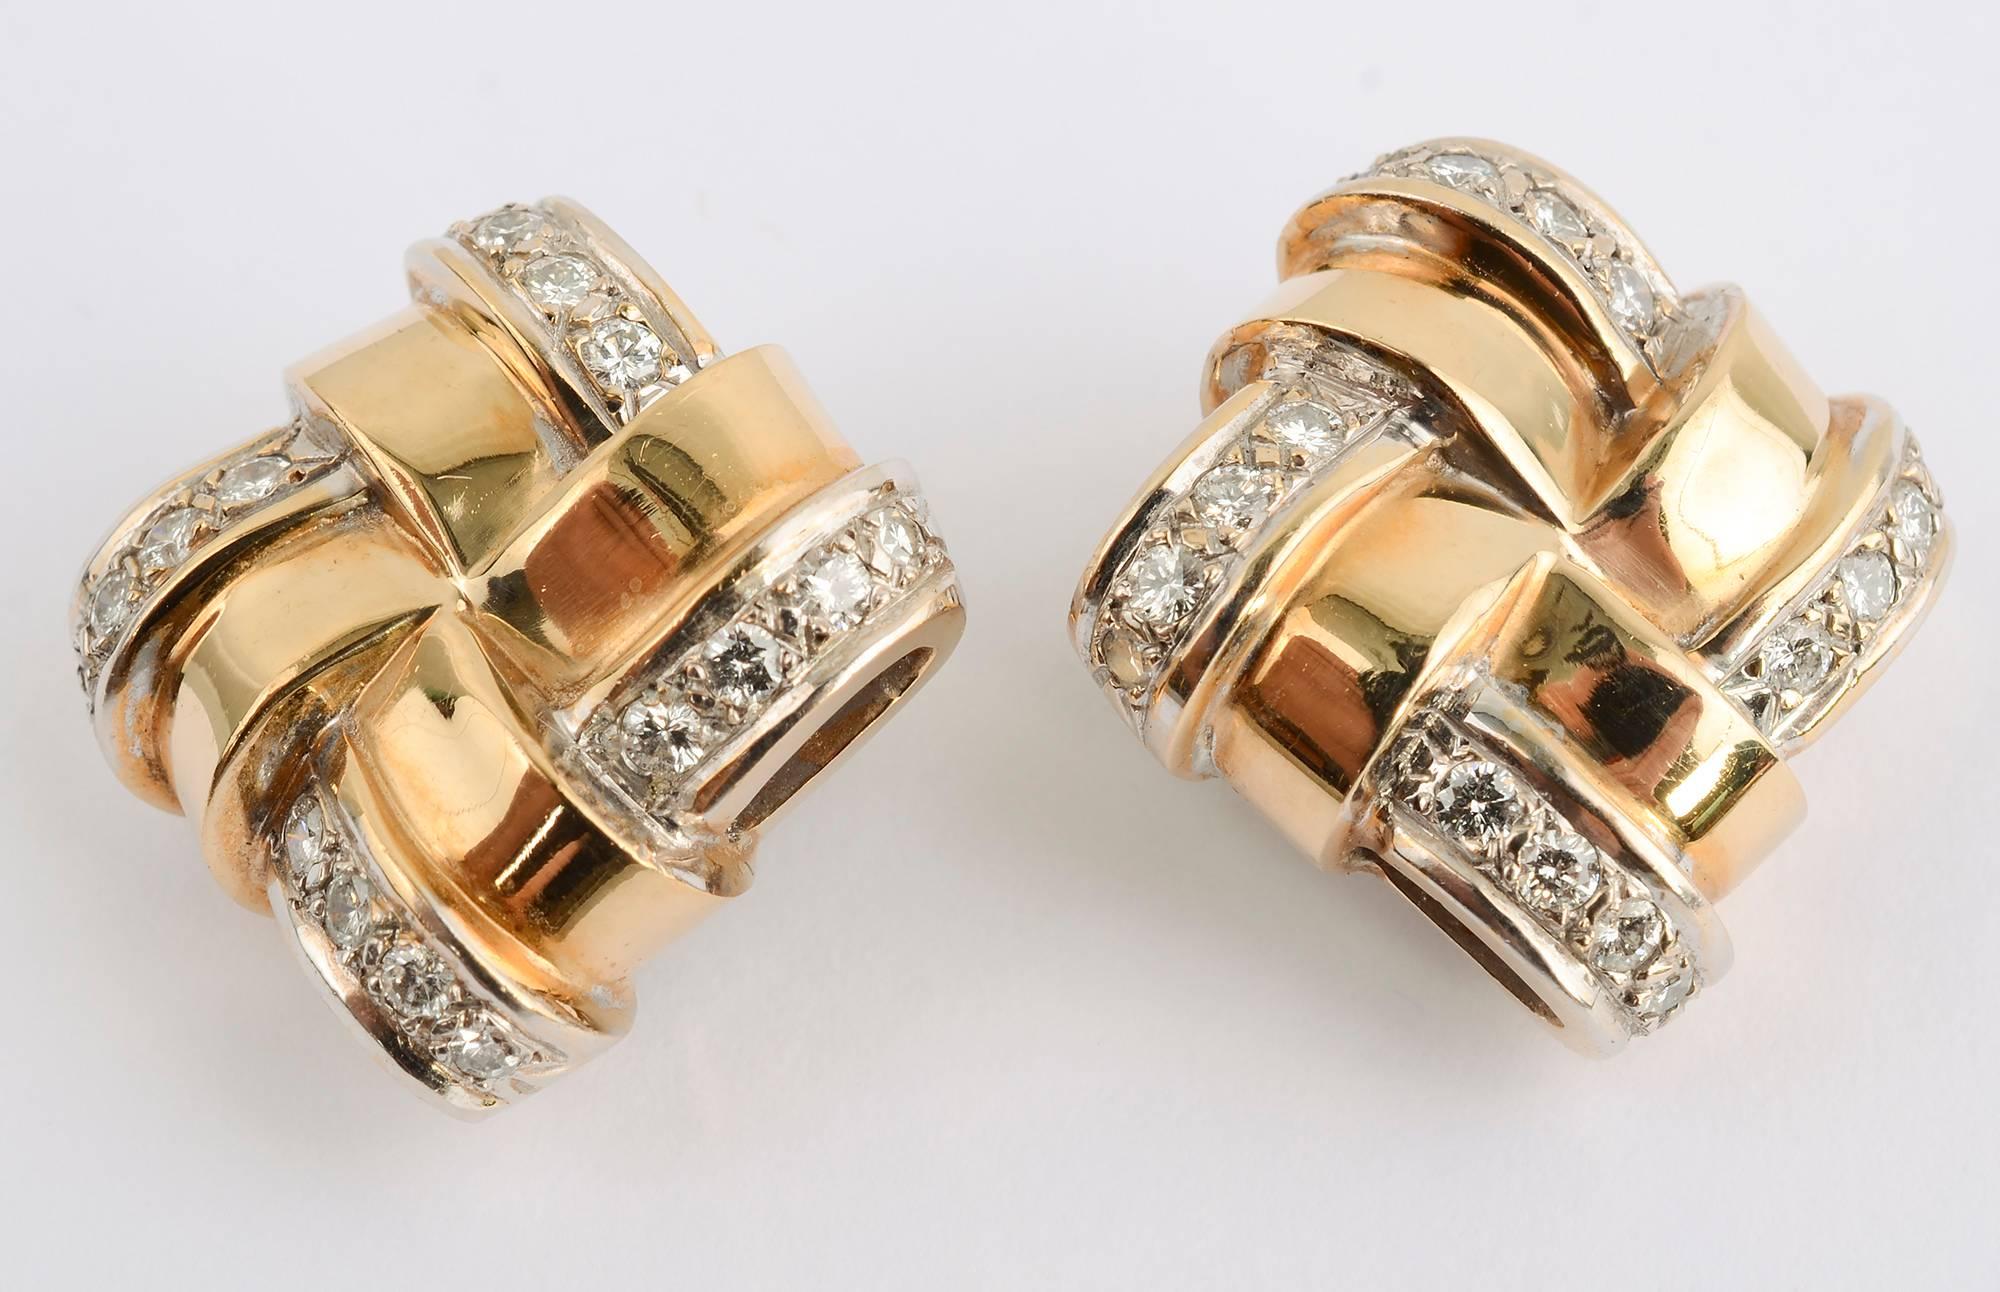 Bands of polished gold alternate with bands of diamonds in these interesting lattice pattern earrings. The woven aspect is especially visible from the side where one sees the graceful curve of the bands that are 1/4 inch in height. The earrings are